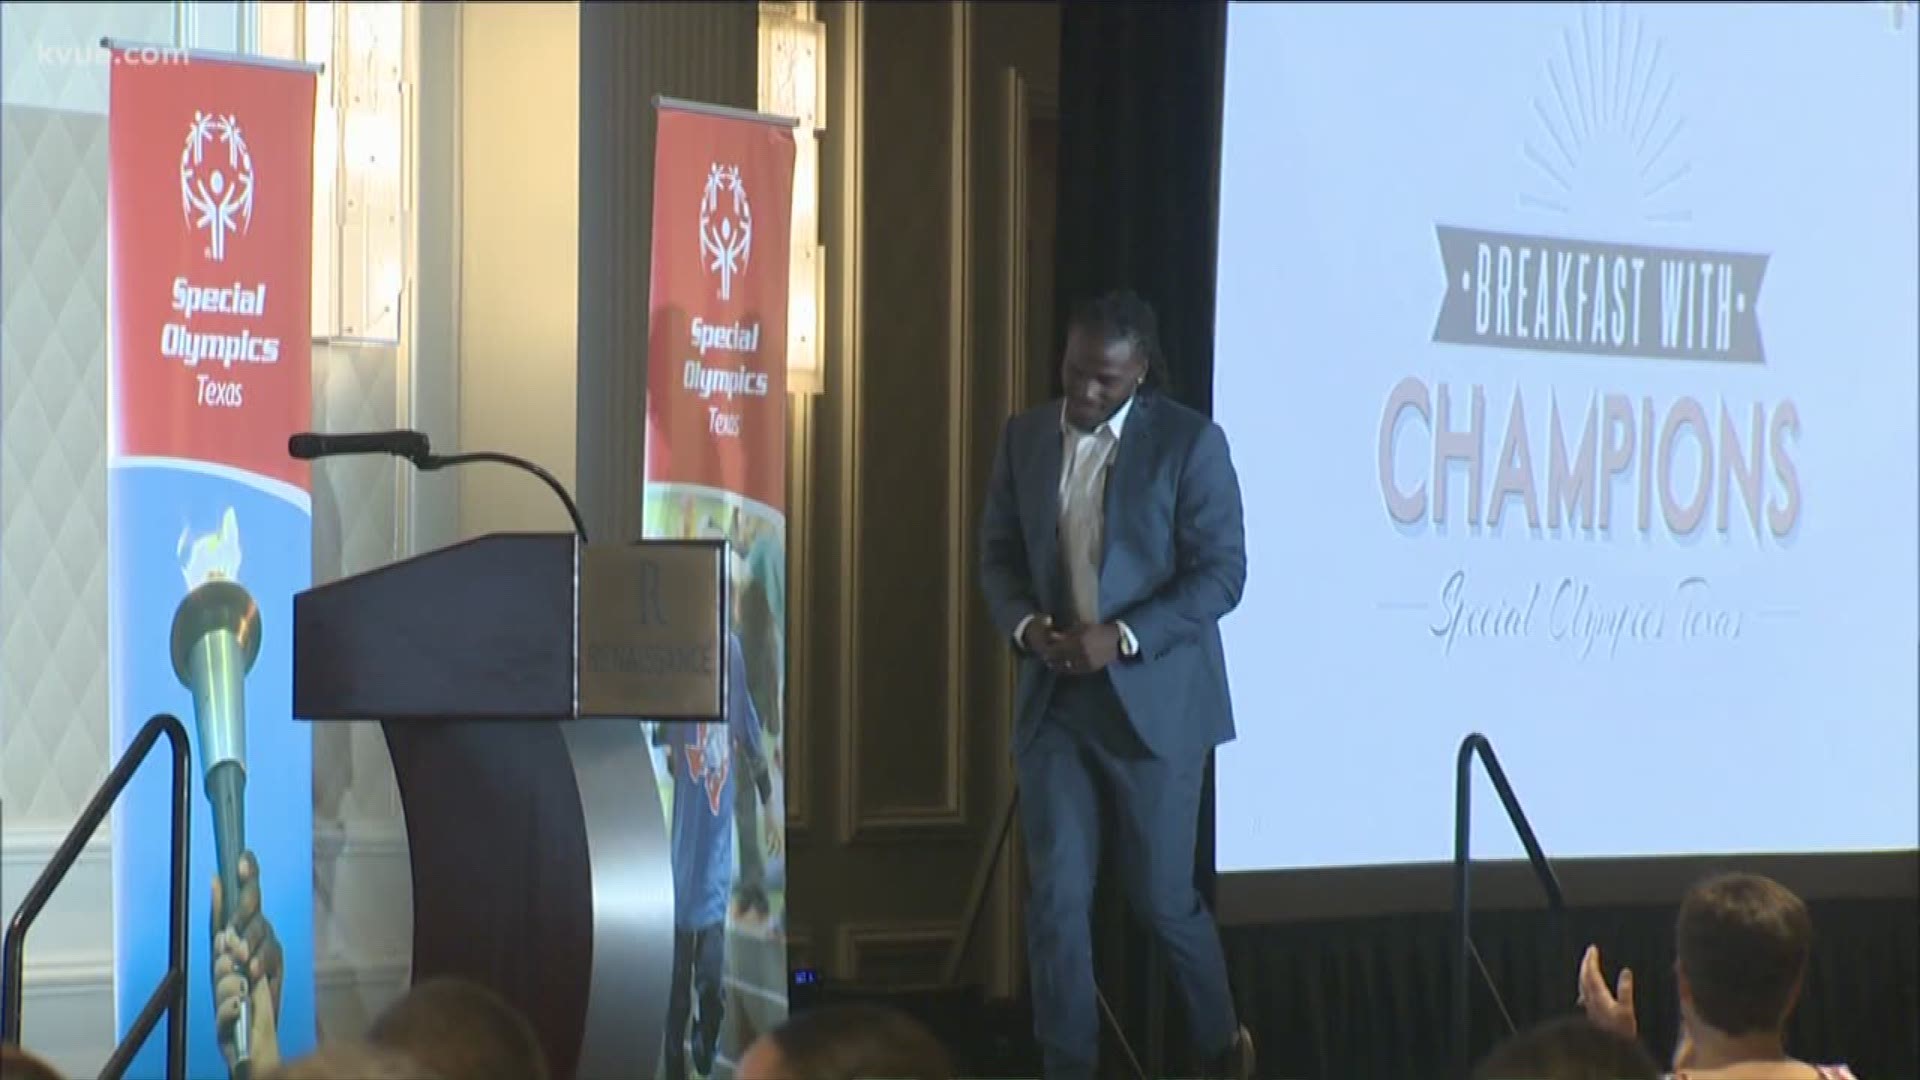 During his speech, Jamaal Charles shared his own experiences as a Special Olympics athlete as a kid, when he was 10 years old.